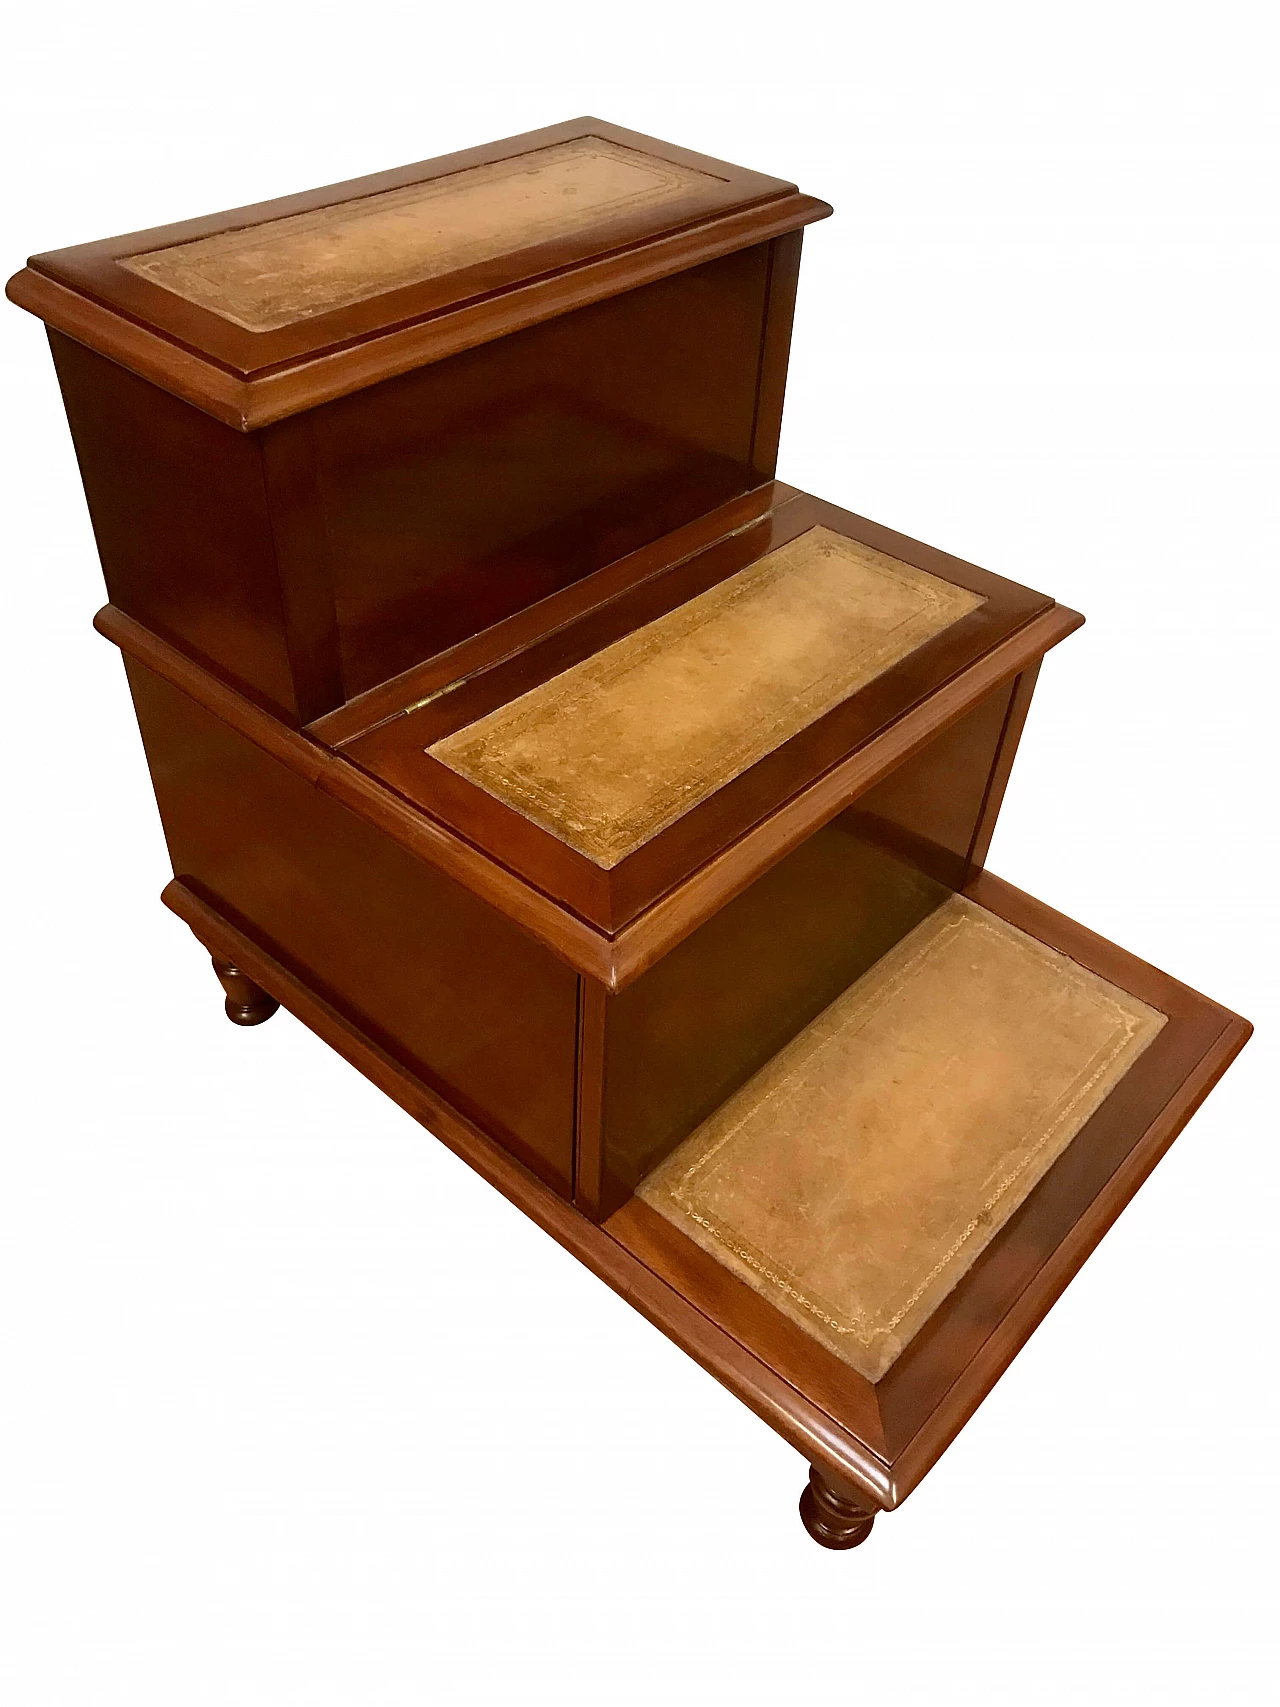 3 steps library ladder in mahogany and leather with 2 compartments, 19th century 1251930